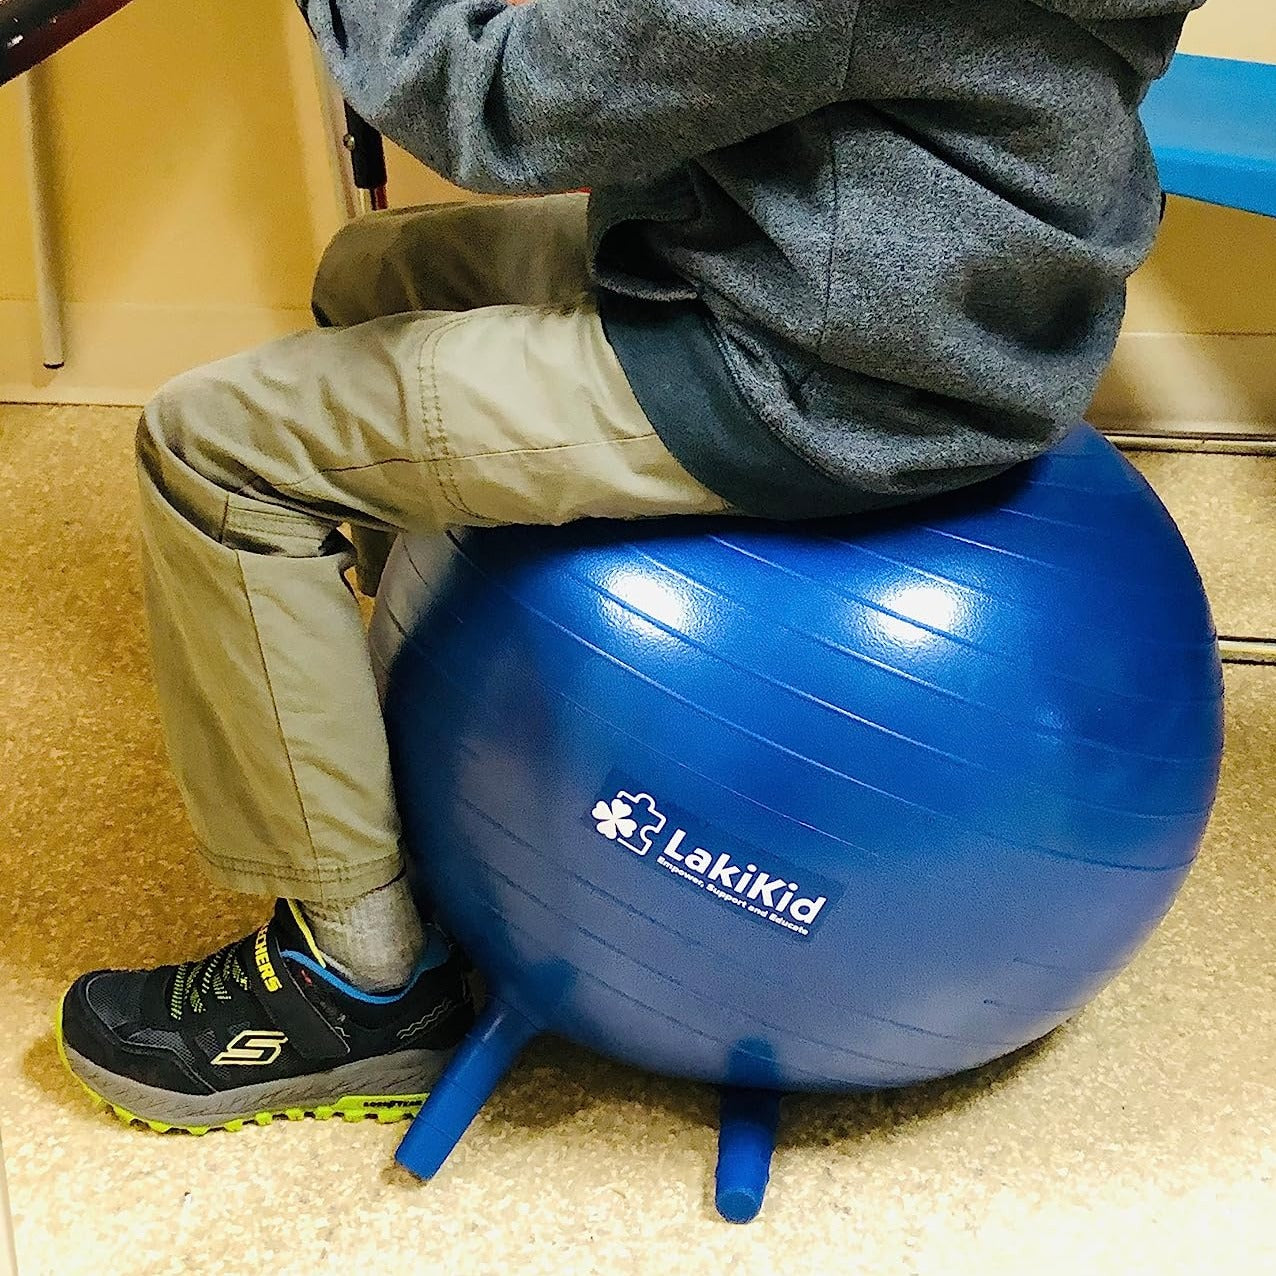 Balance Ball Chair, Our inflatable ball seats allow students to move and balance—reducing restlessness and improving focus while they learn! The Balance Ball Chair is made with sturdy, easy-clean PVC that’s lightweight enough for kids to move around the class, the seats each include legs to keep them in place right where you want them Balls are commonly used for: To improve dynamic balance by sitting or lying on top of the ball Activities to facilitate movement and general gross motor coordination Exercises